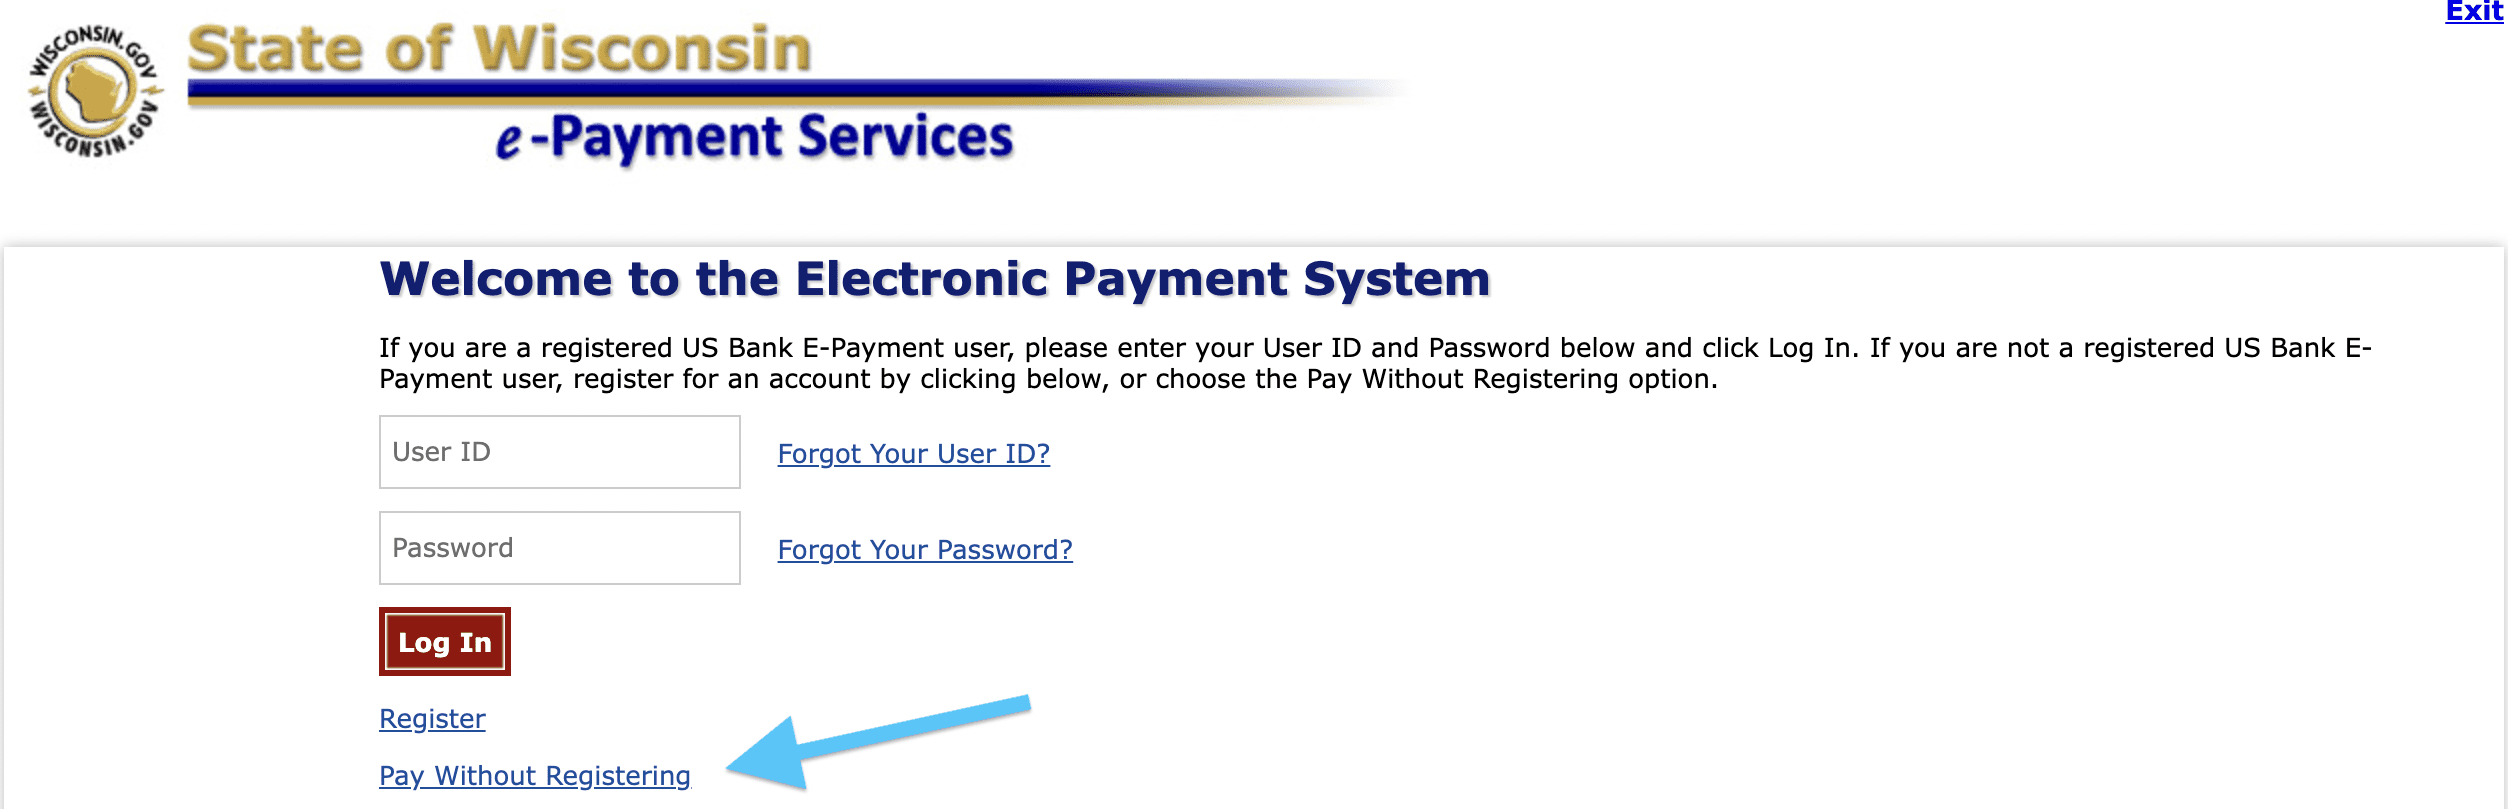 Payment for your Wisconsin LLC is processed through the Wisconsin e-Payment Services portal.